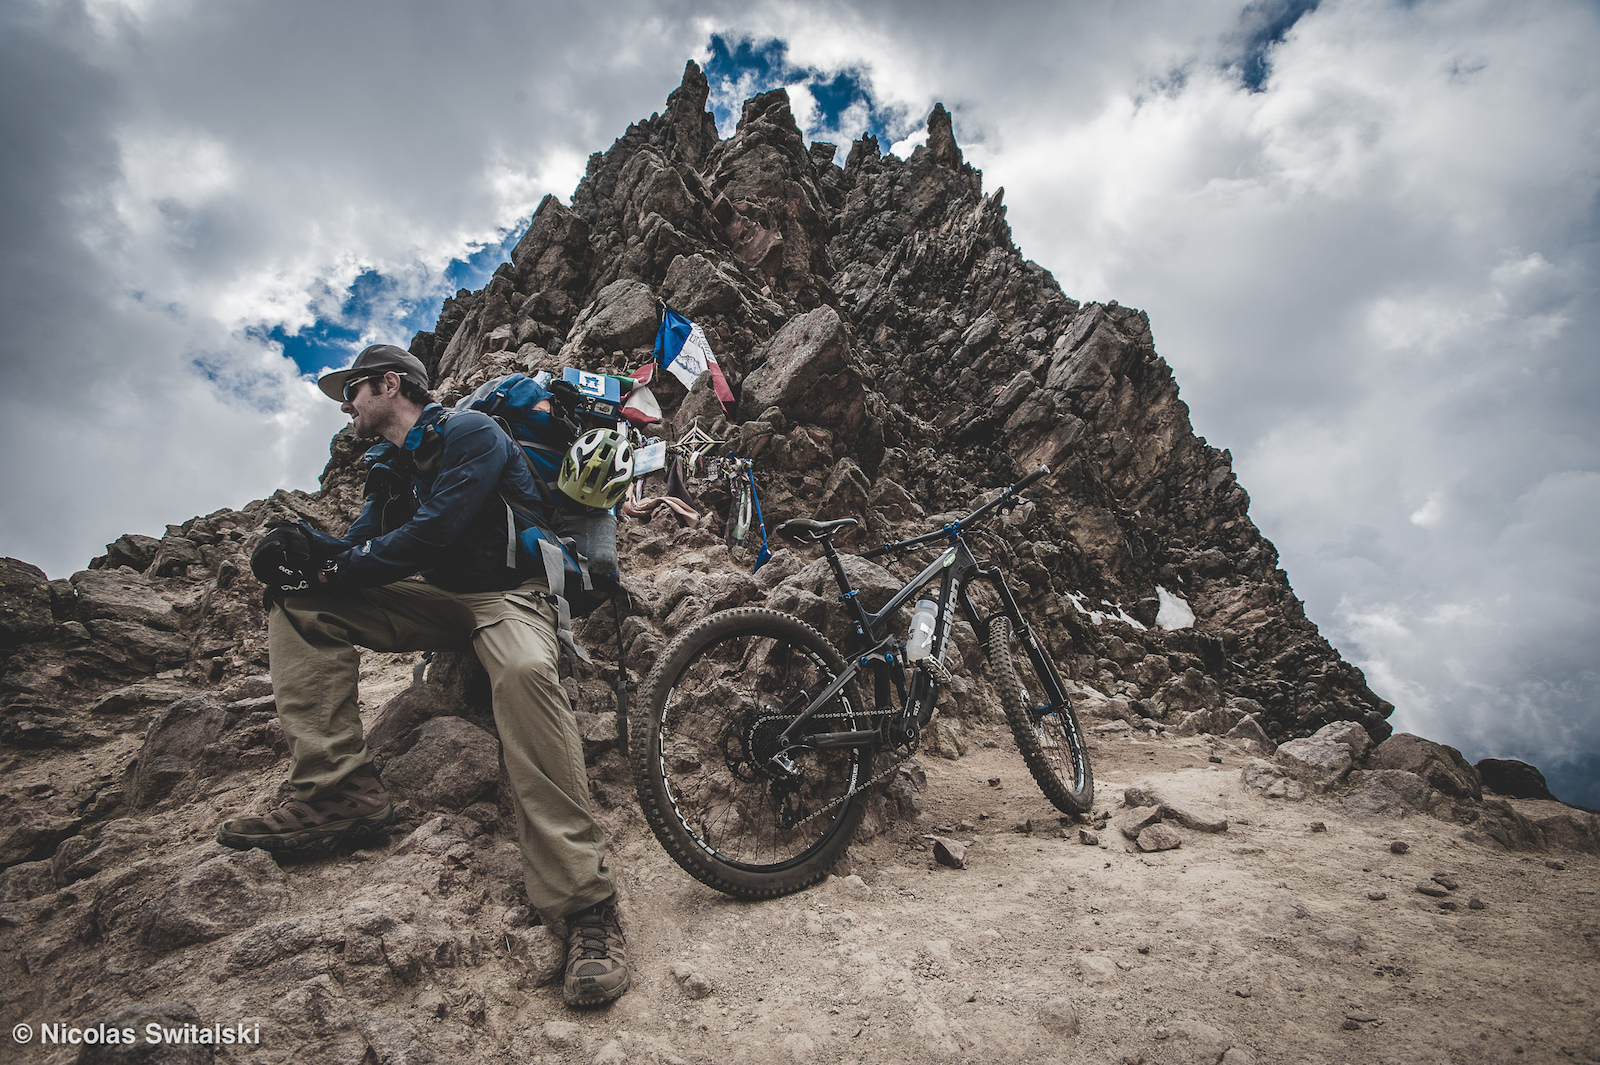 Image for the article - Iztaccíhuatl: Riding down a volcano